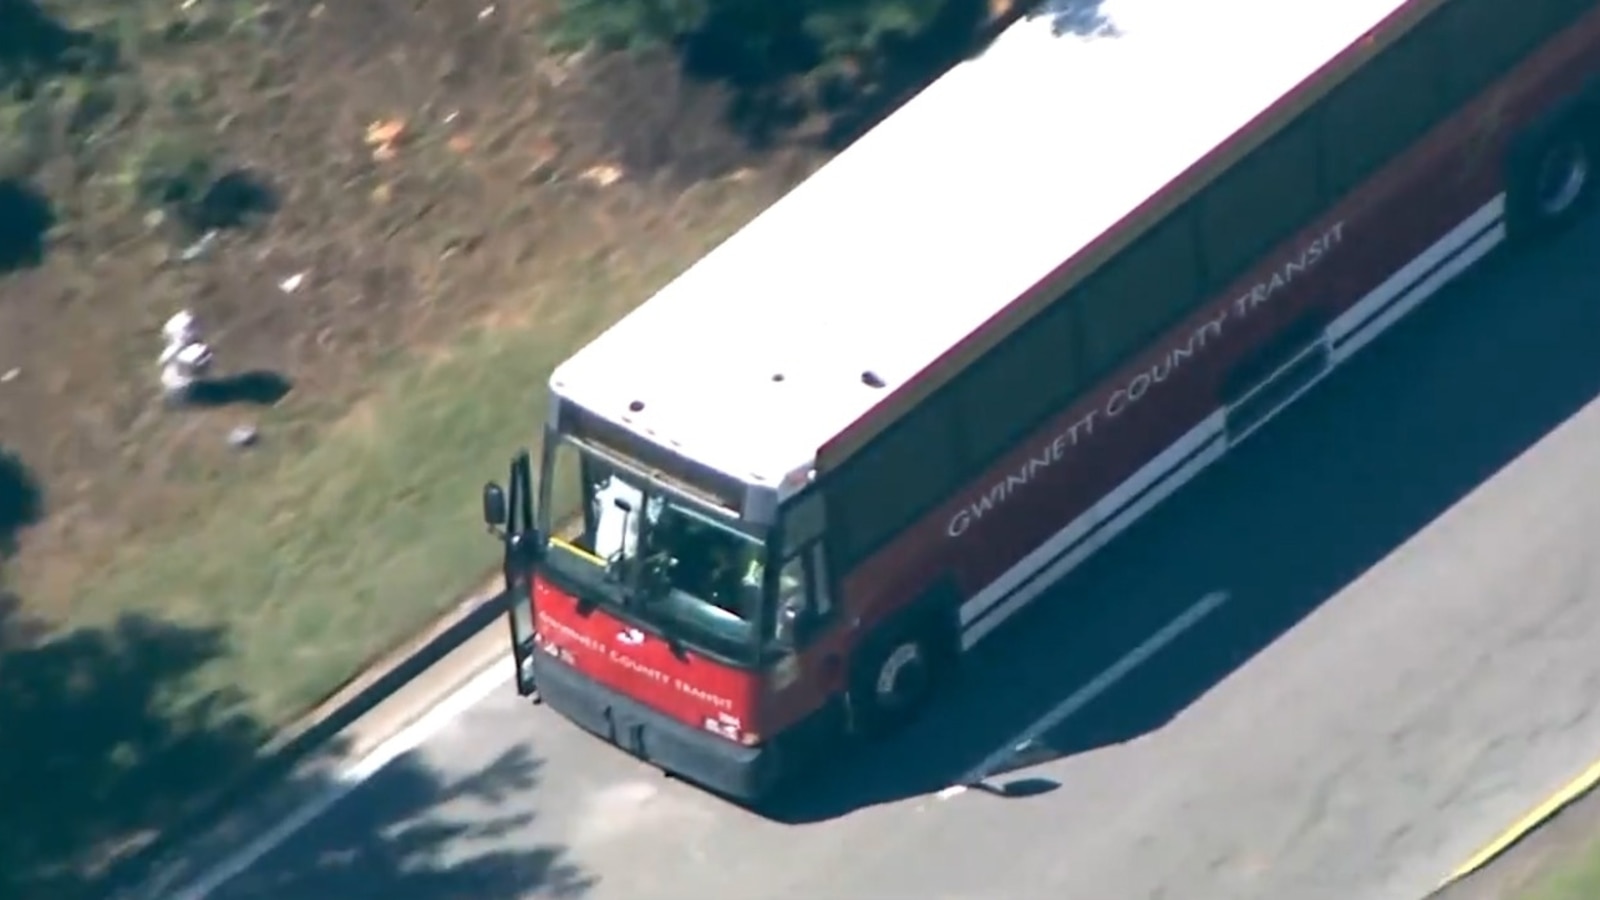 1 dead after bus hijacking in Georgia; suspect in custody: Police